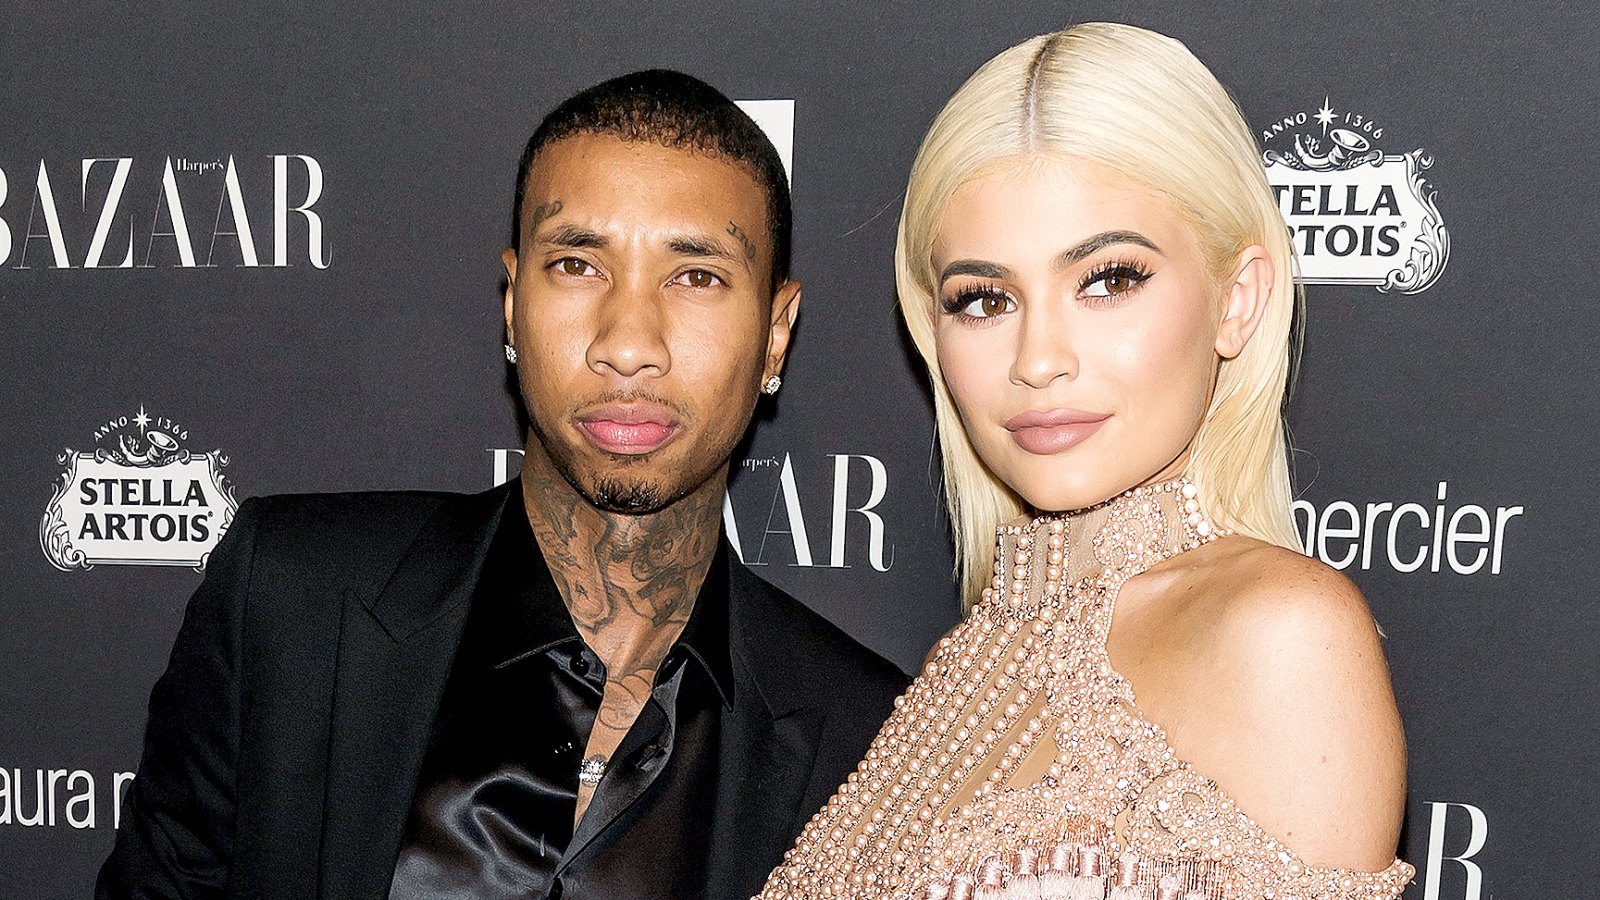 Kylie Jenner And Tyga Go Christmas Shopping Together And Kylie